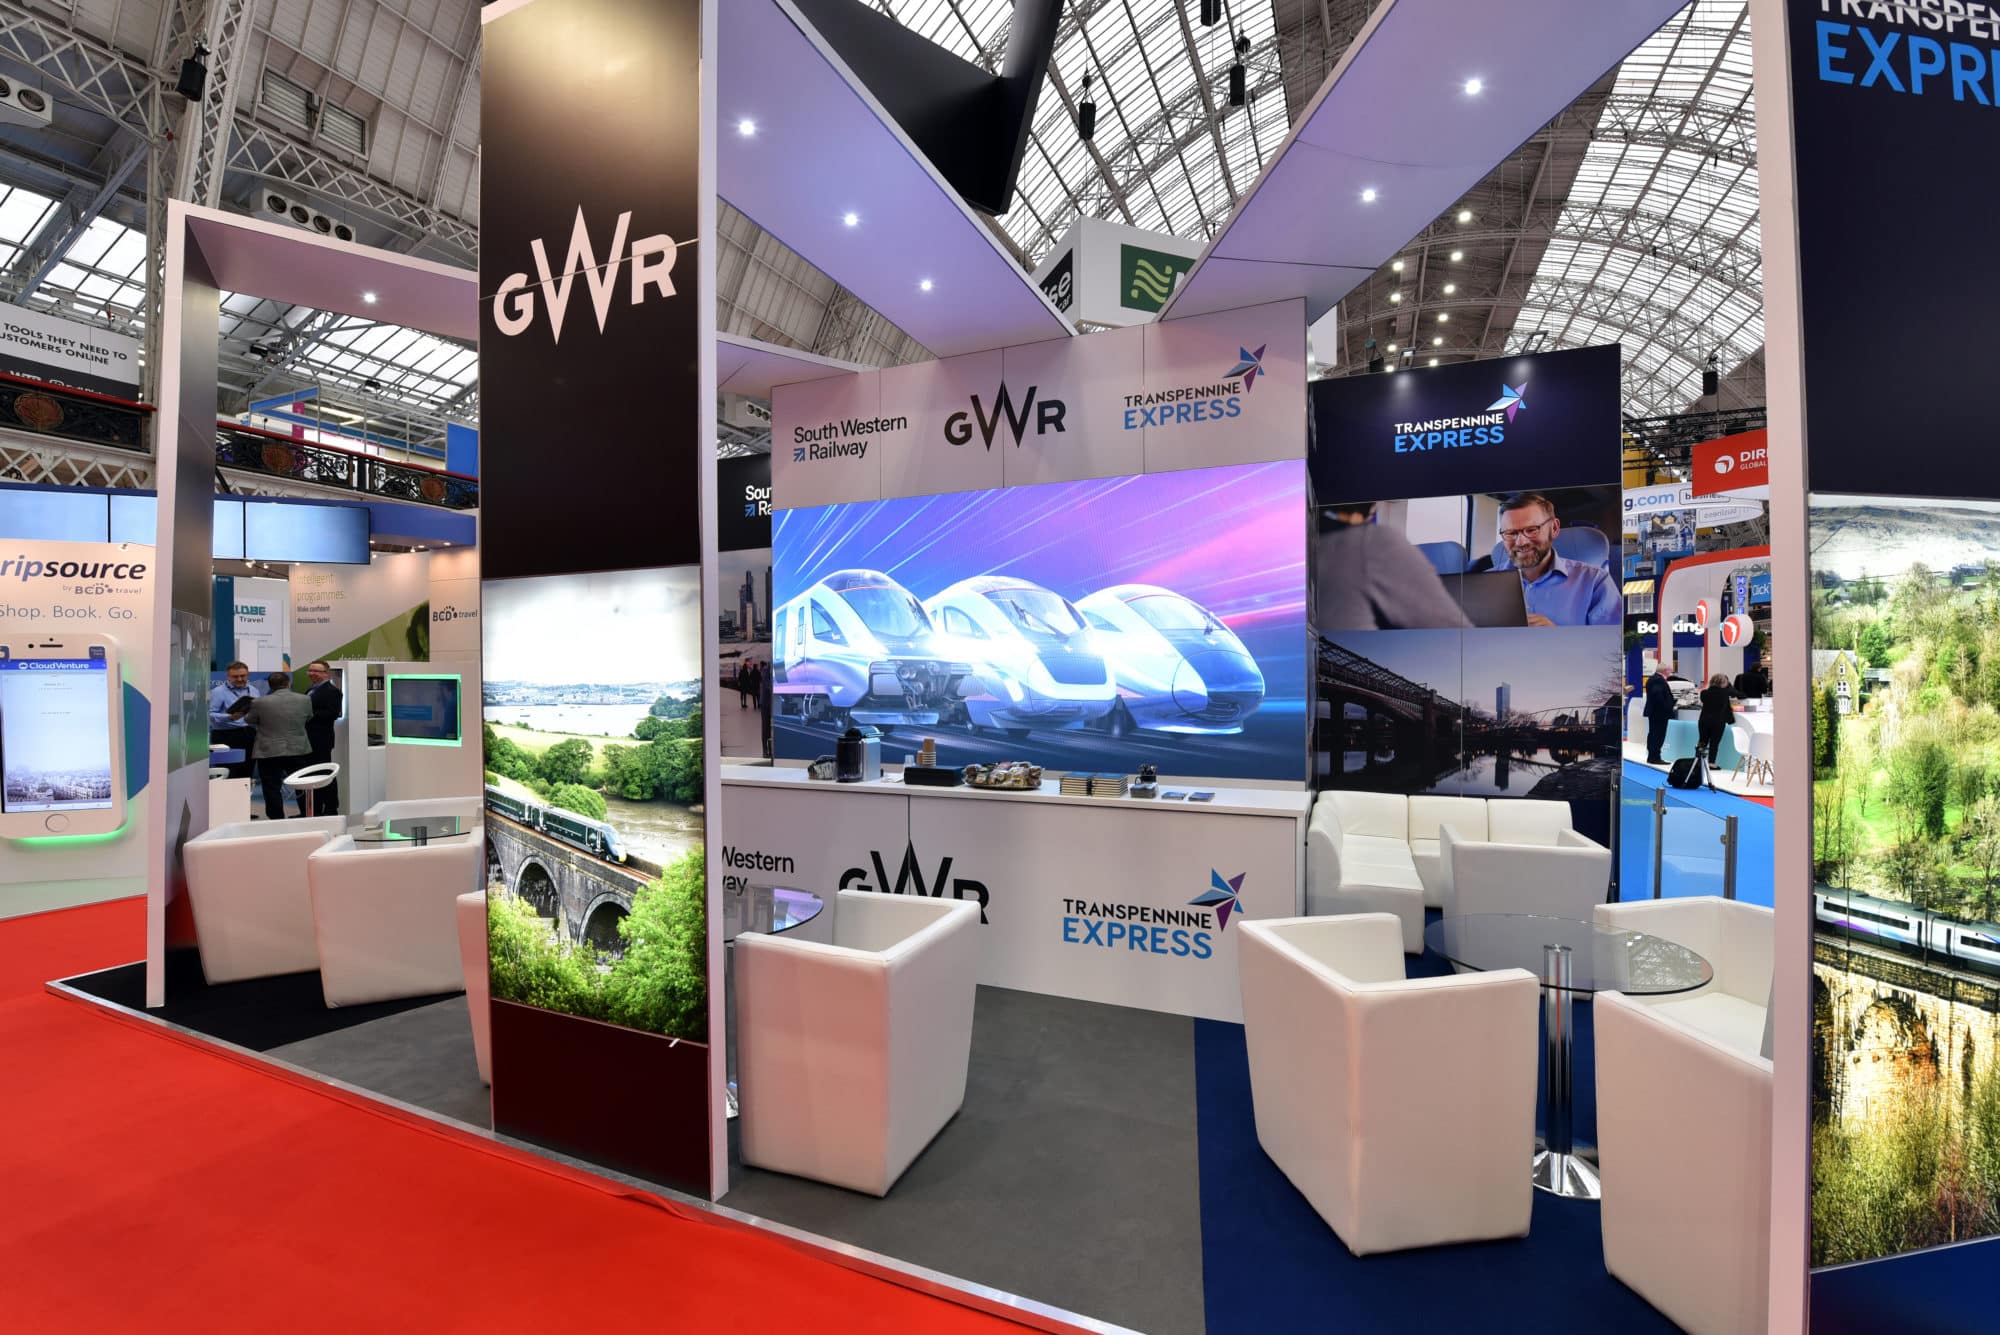 bespoke exhibition stand for GWR at BTS Europe